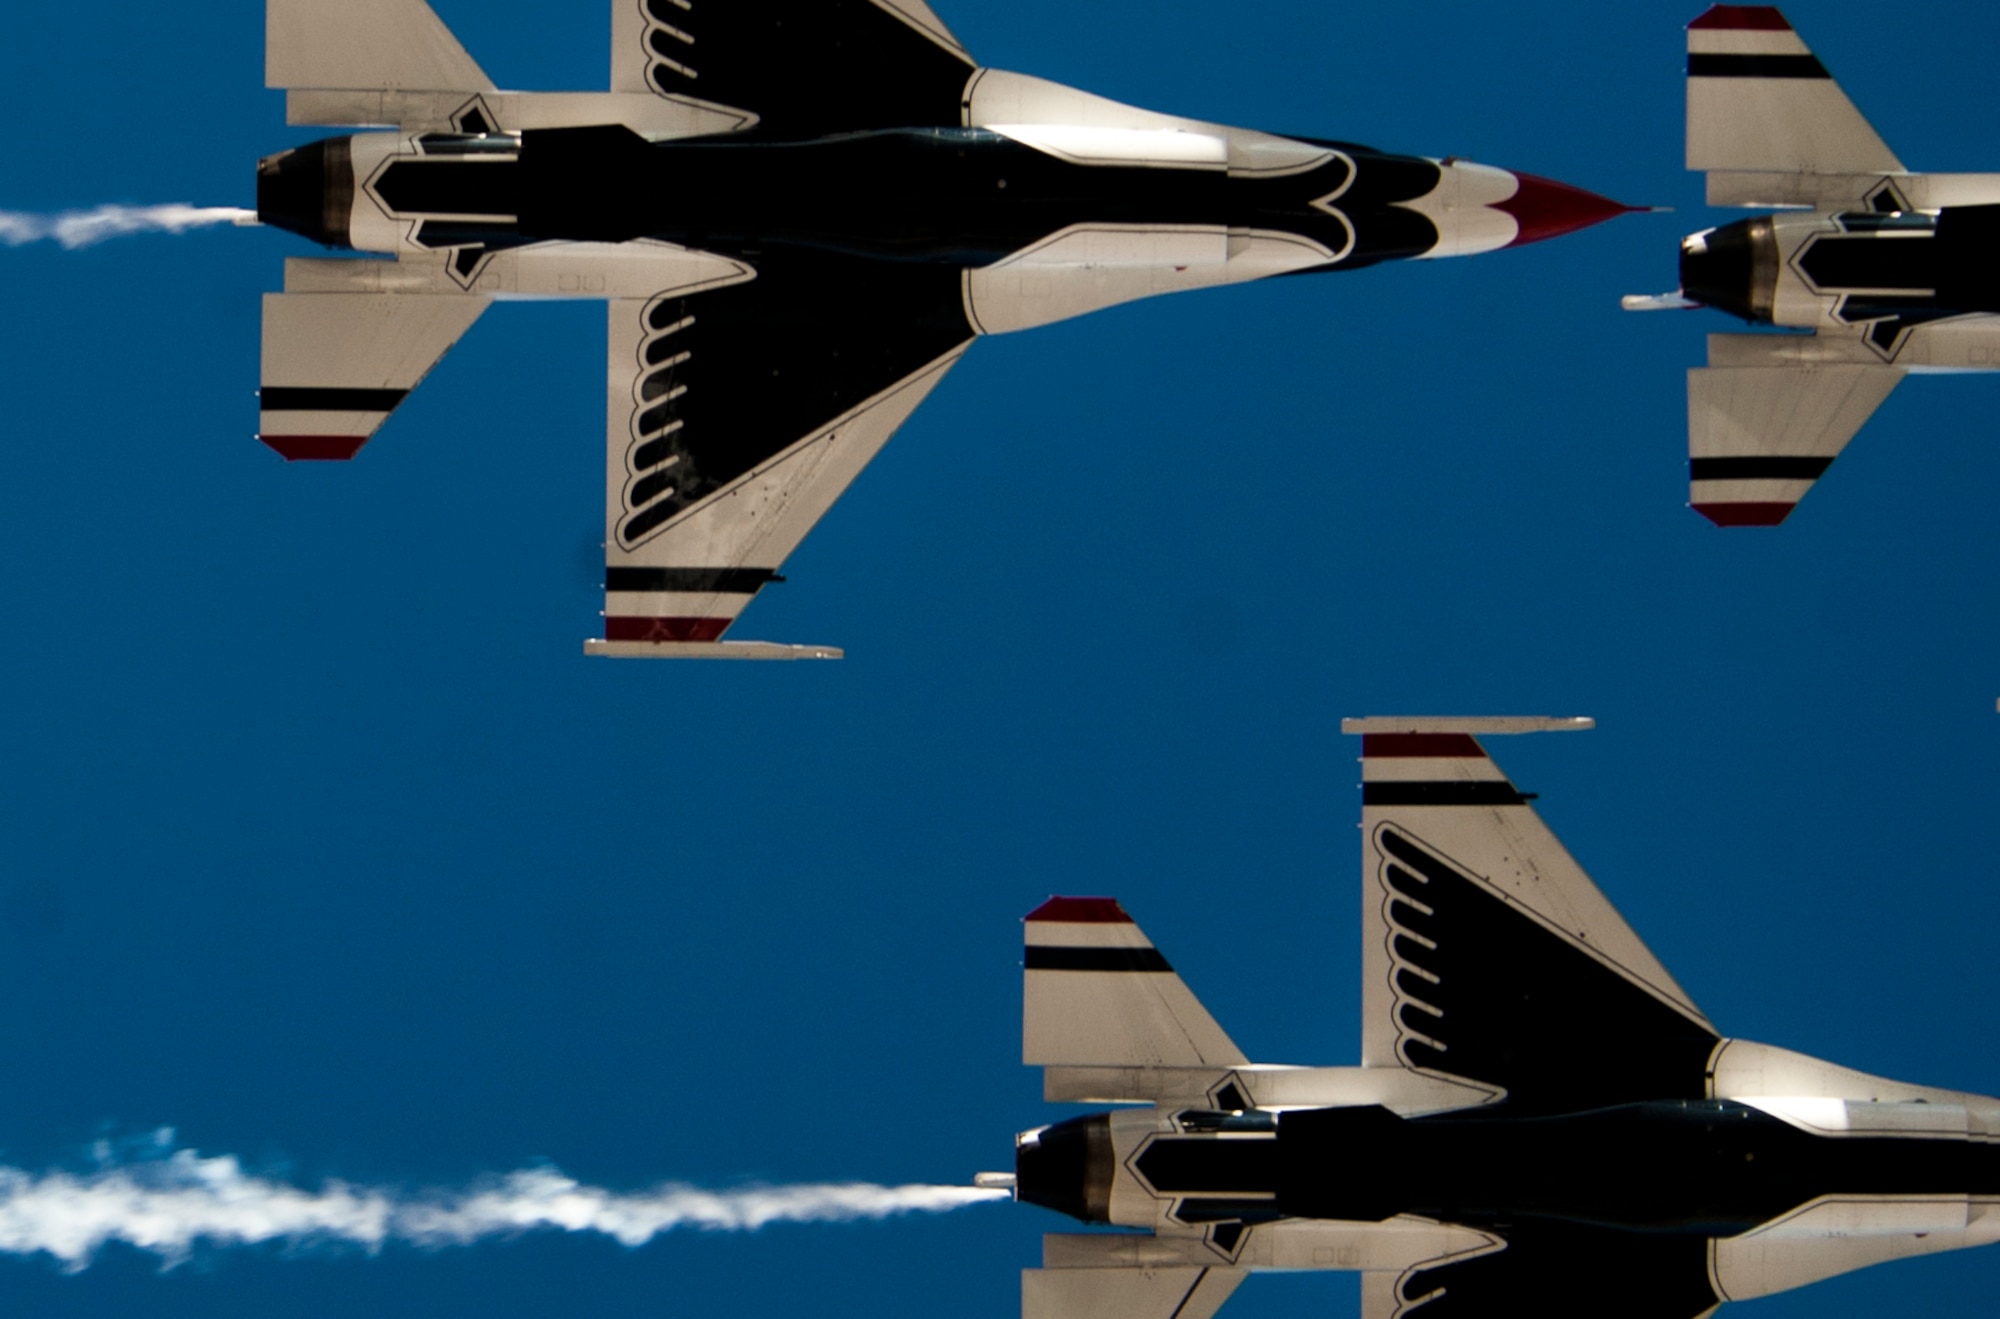 U.S. Air Force Thunderbird Air Demonstration Squadron  aircraft fly in a close-air formation during Aviation Nation on Nellis Air Force Base, Nev., Nov. 11, 2016. The Thunderbirds are the Air Force’s demonstration team that showcase the decisive combat power, precision and professionalism of the aviators, maintenance and support Airmen. (U.S. Air Force photo by Airman 1st Class Kevin Tanenbaum/Released)